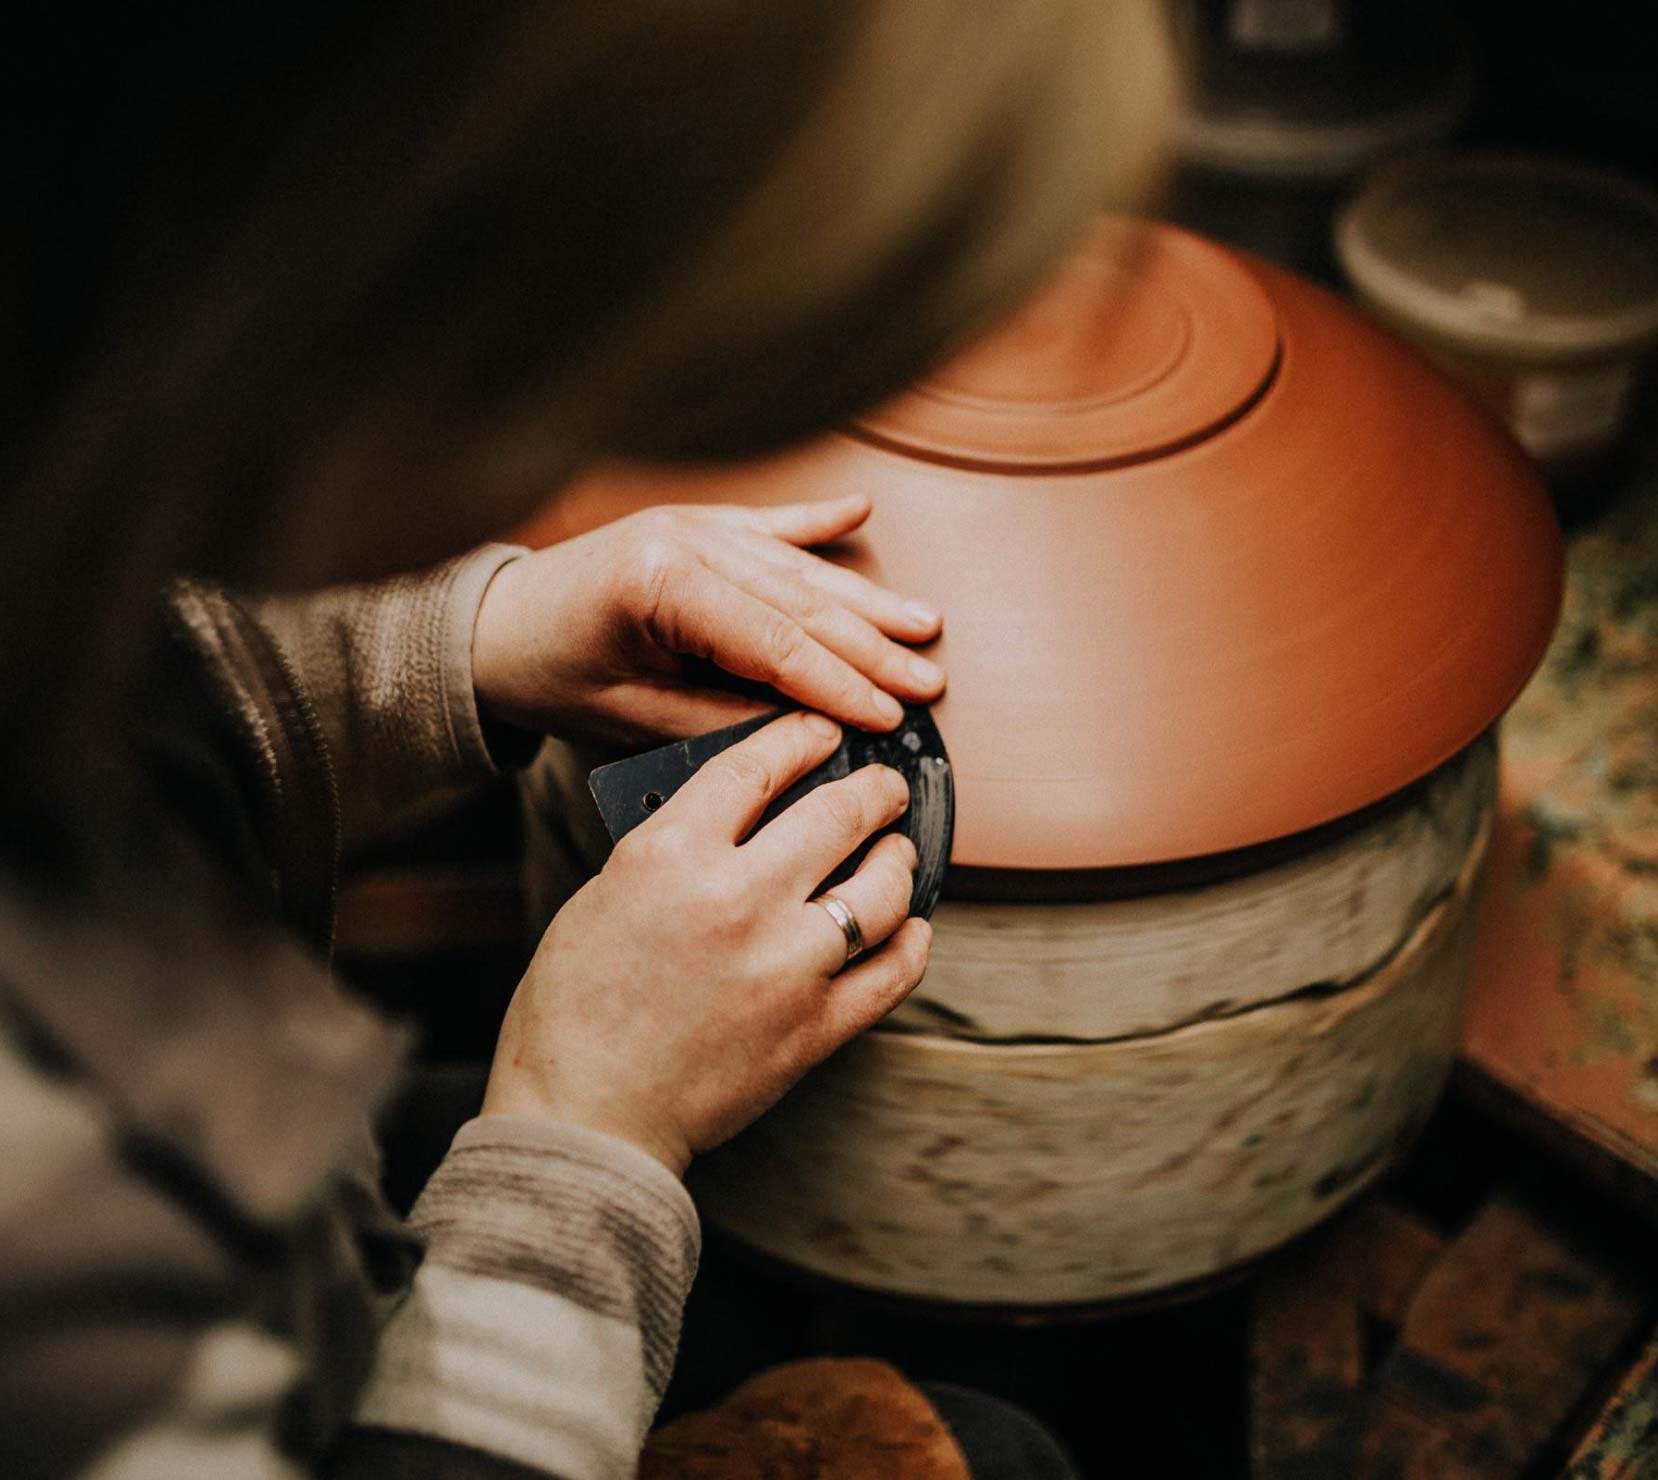 Our skilled artisan MAIJA polishing the collection Earth centerpiece bowl